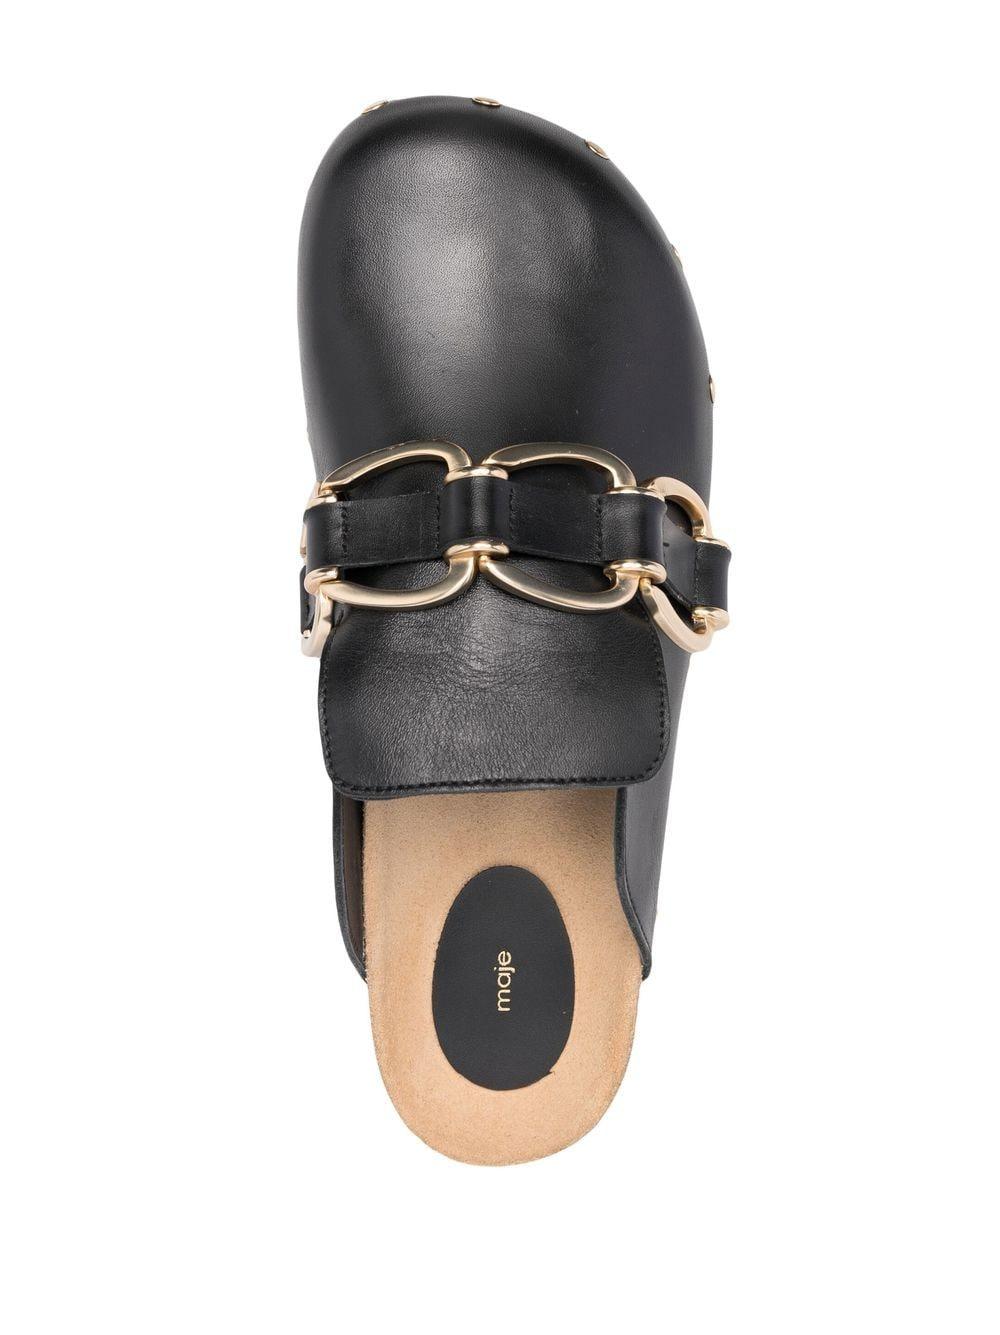 Maje Chain-link Fran Mules in Black | Lyst